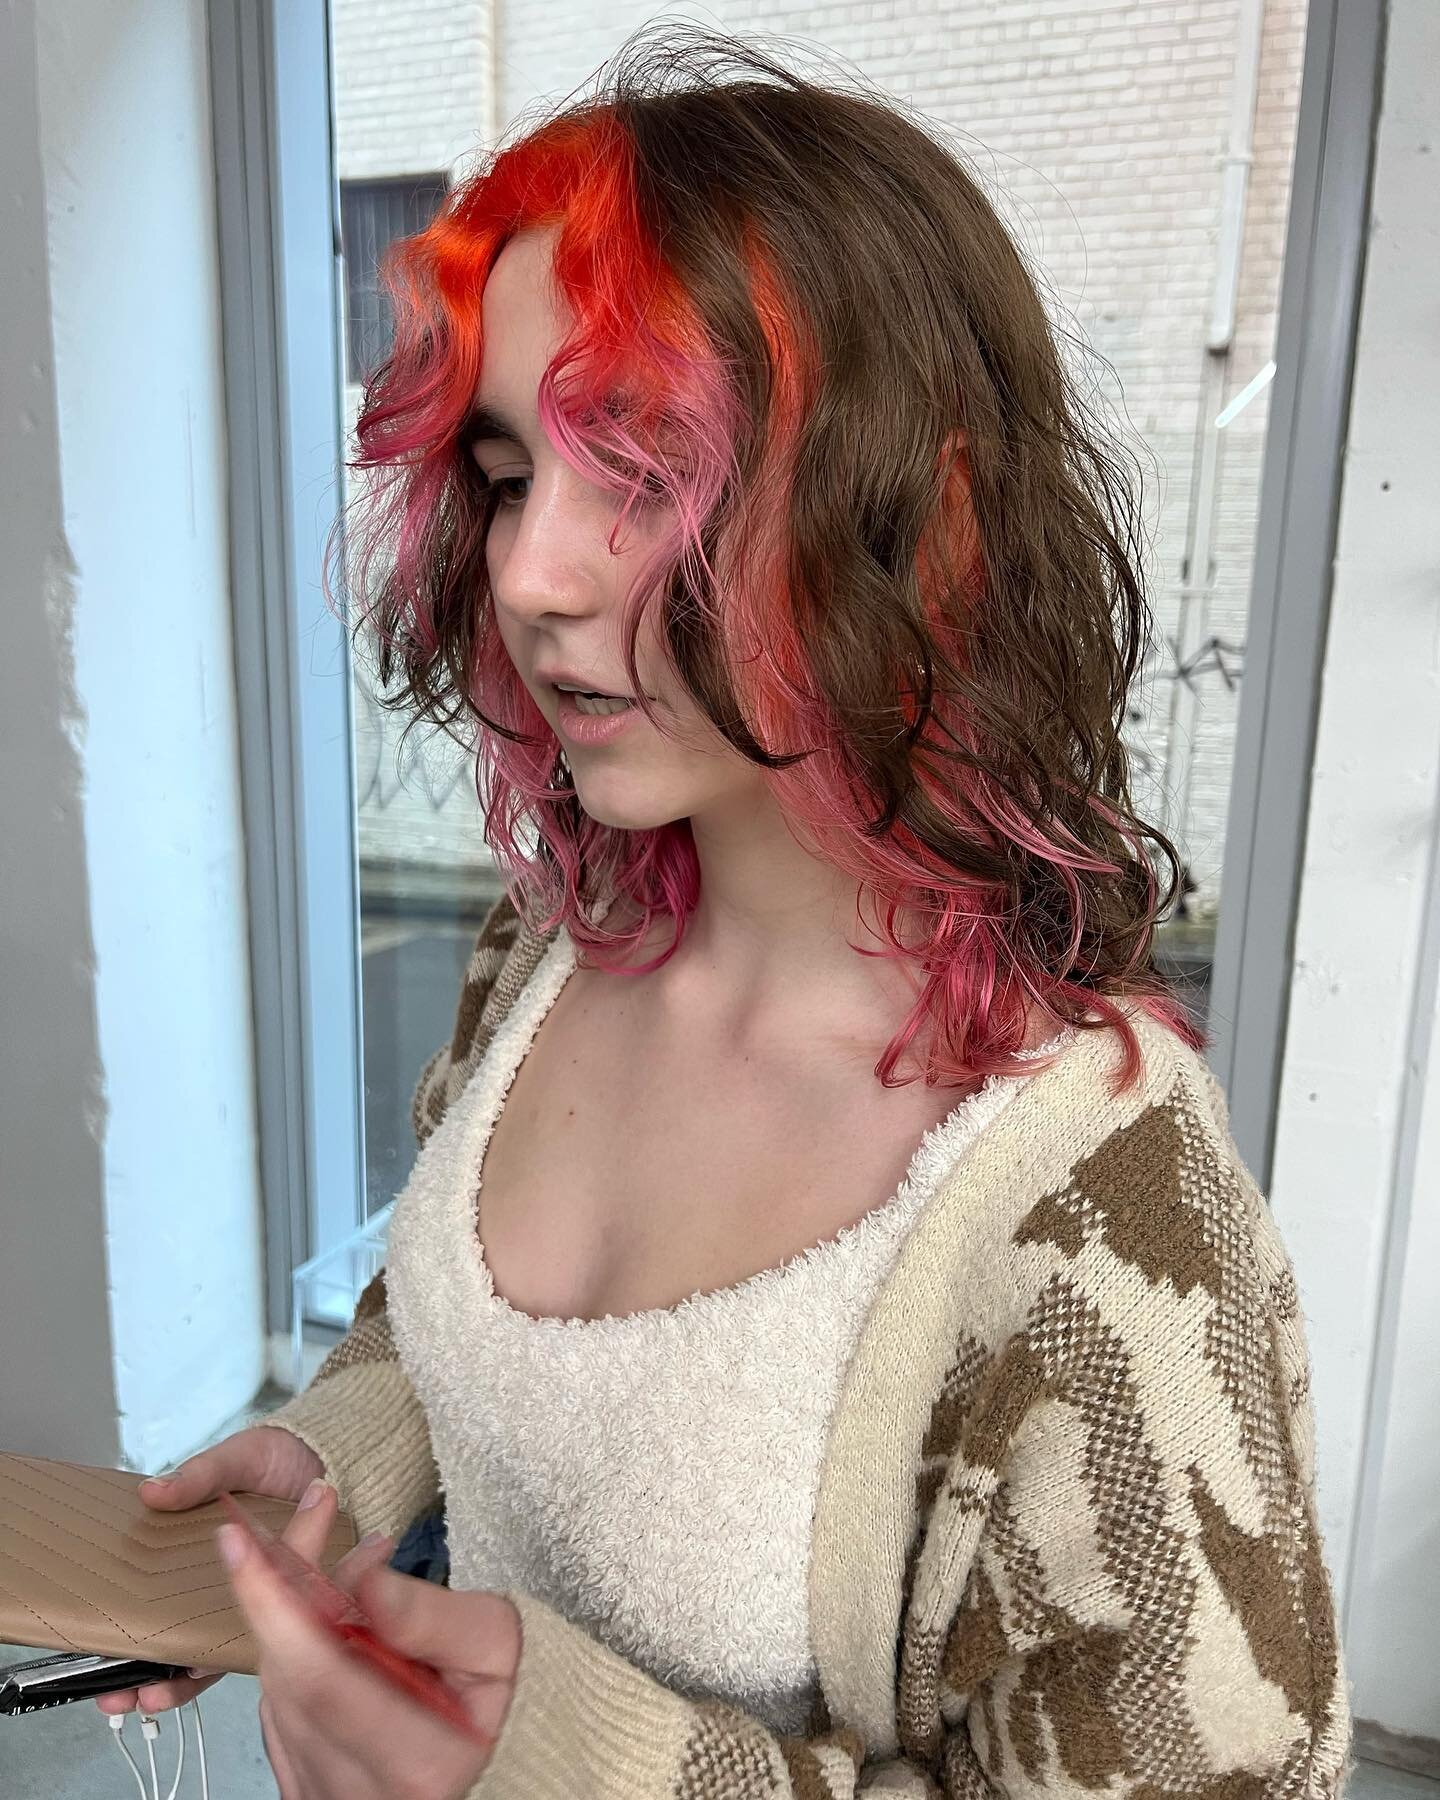 Inner colour &amp; cut for Ishbel 🧡 Colour assisted by @i_am_umi &amp; @nico_usfin. Swipe ➡️ to see more &amp; before. Colour using @joicointensity Cut @mizutaniaustralia 

#usfinatelier #hairtransformation #sydneyhairdresser #sydneyhairstylist #syd